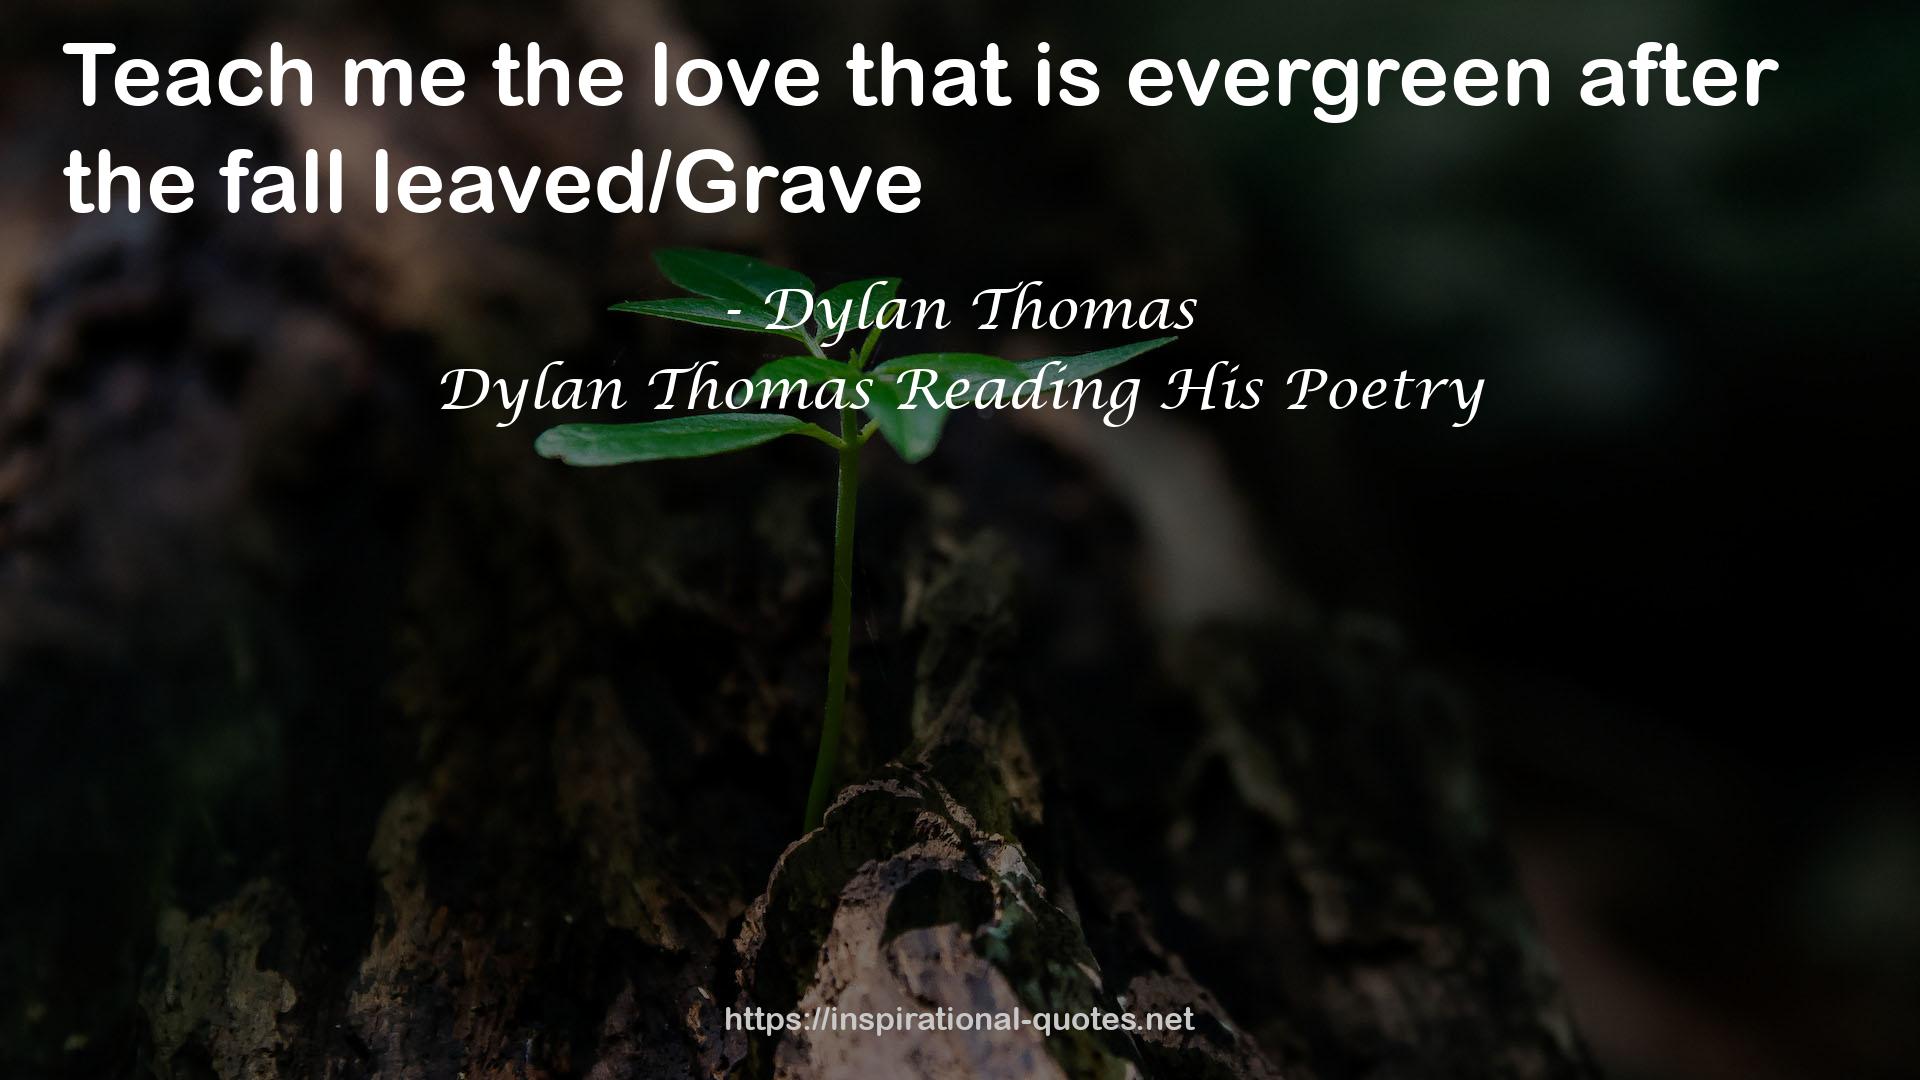 Dylan Thomas Reading His Poetry QUOTES